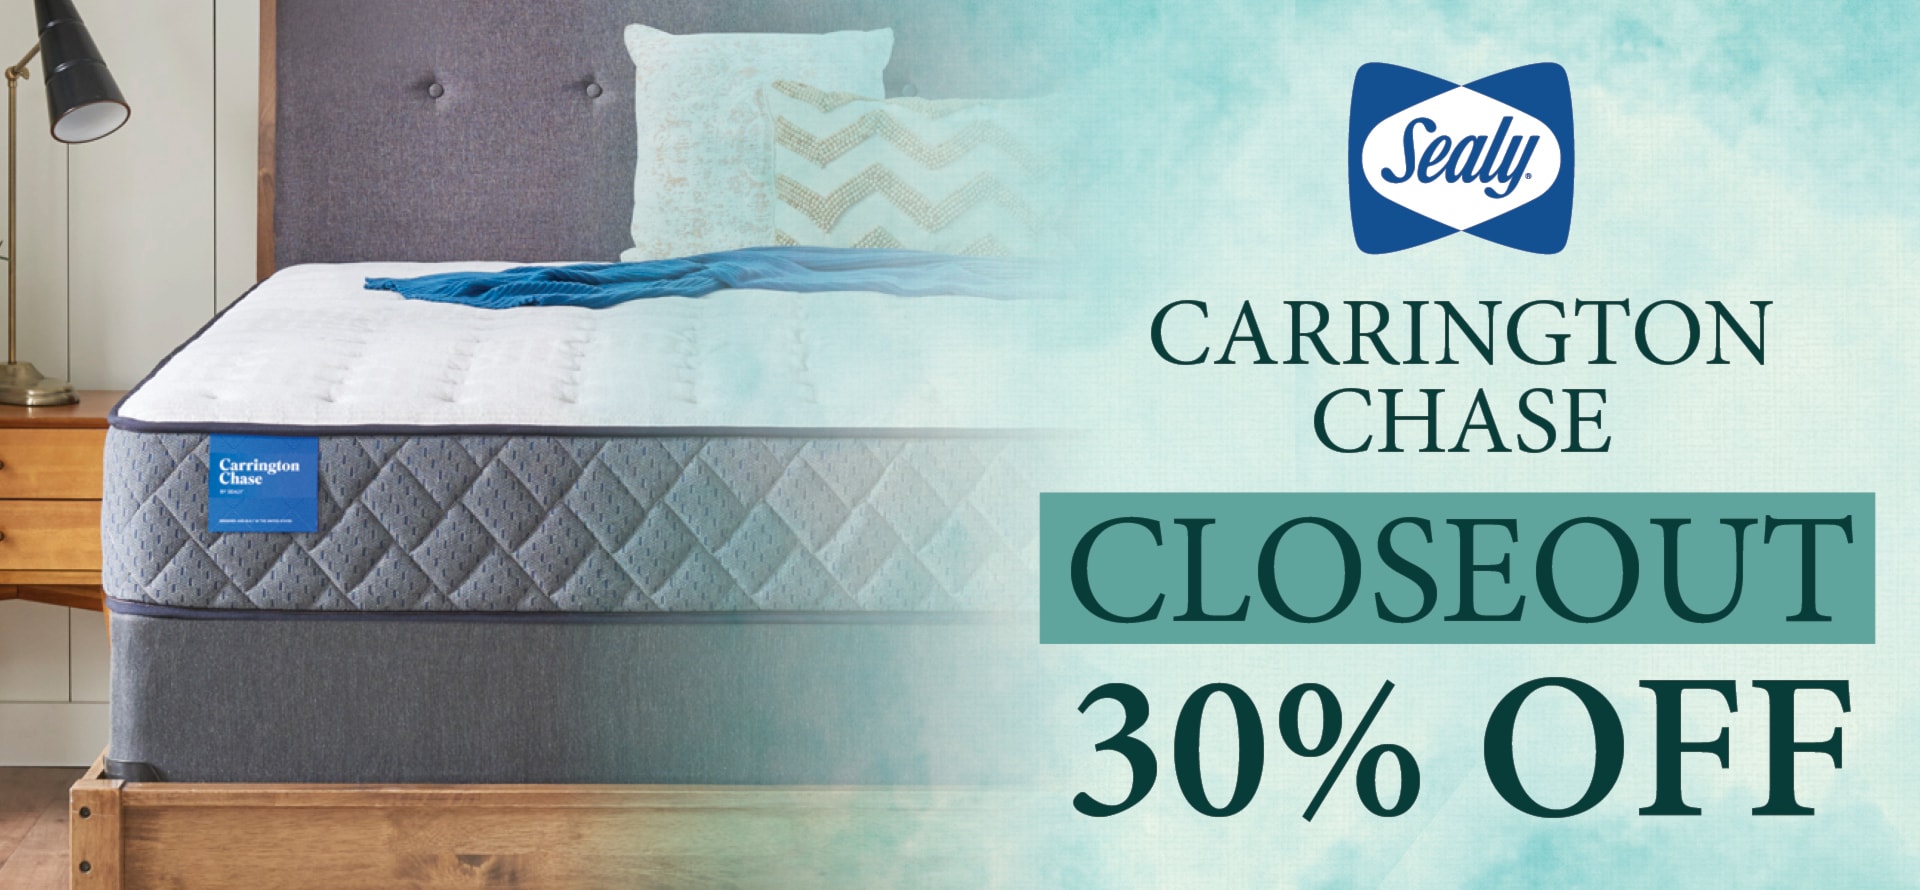 Sealy Closeouts at 30% off mattresses.